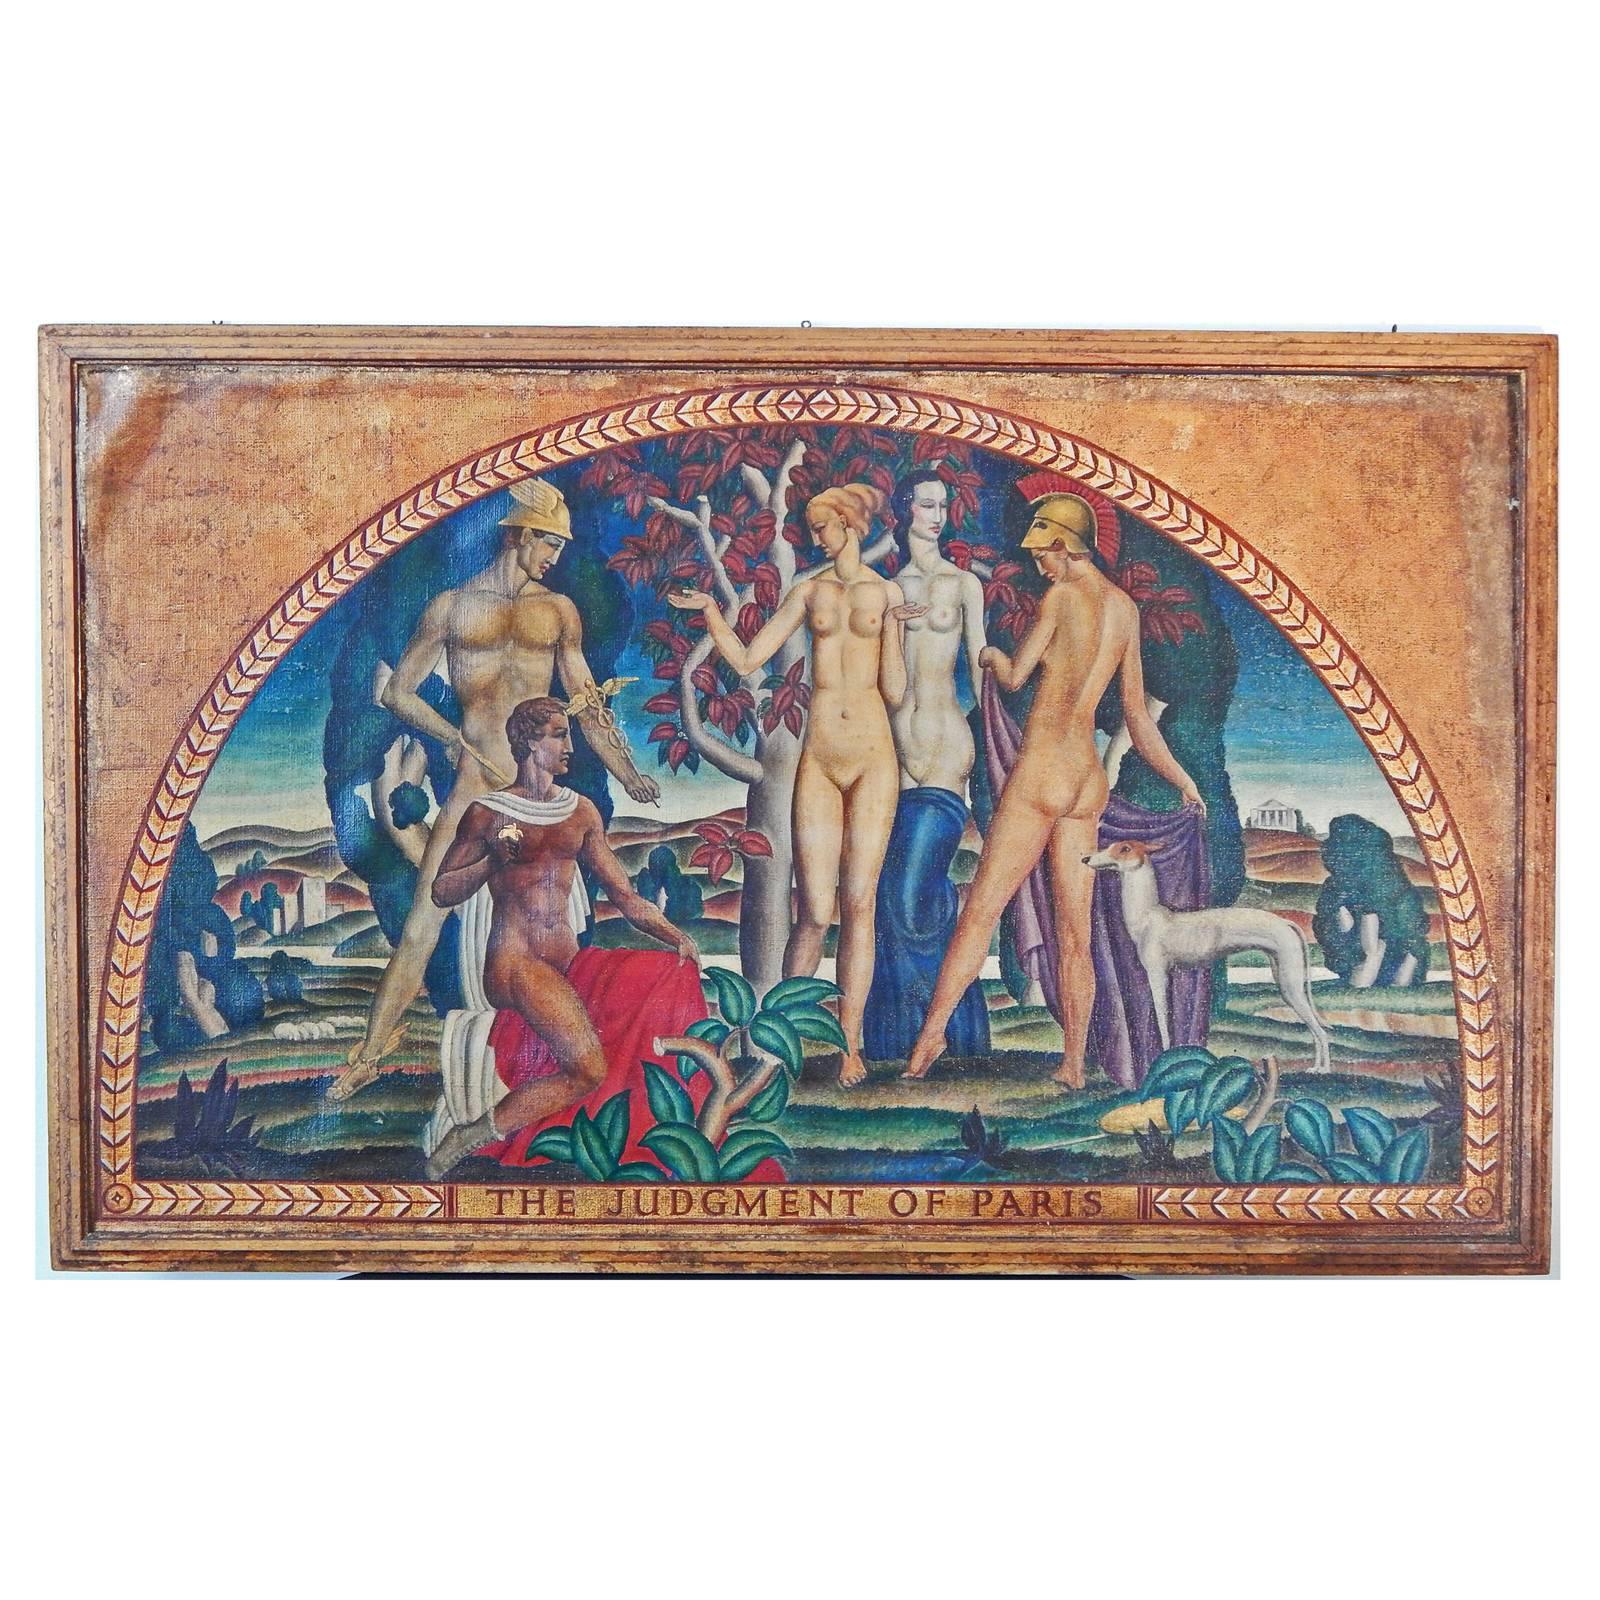 "the Judgment of Paris, " Fabulous Art Deco Mural with Nudes by Machin